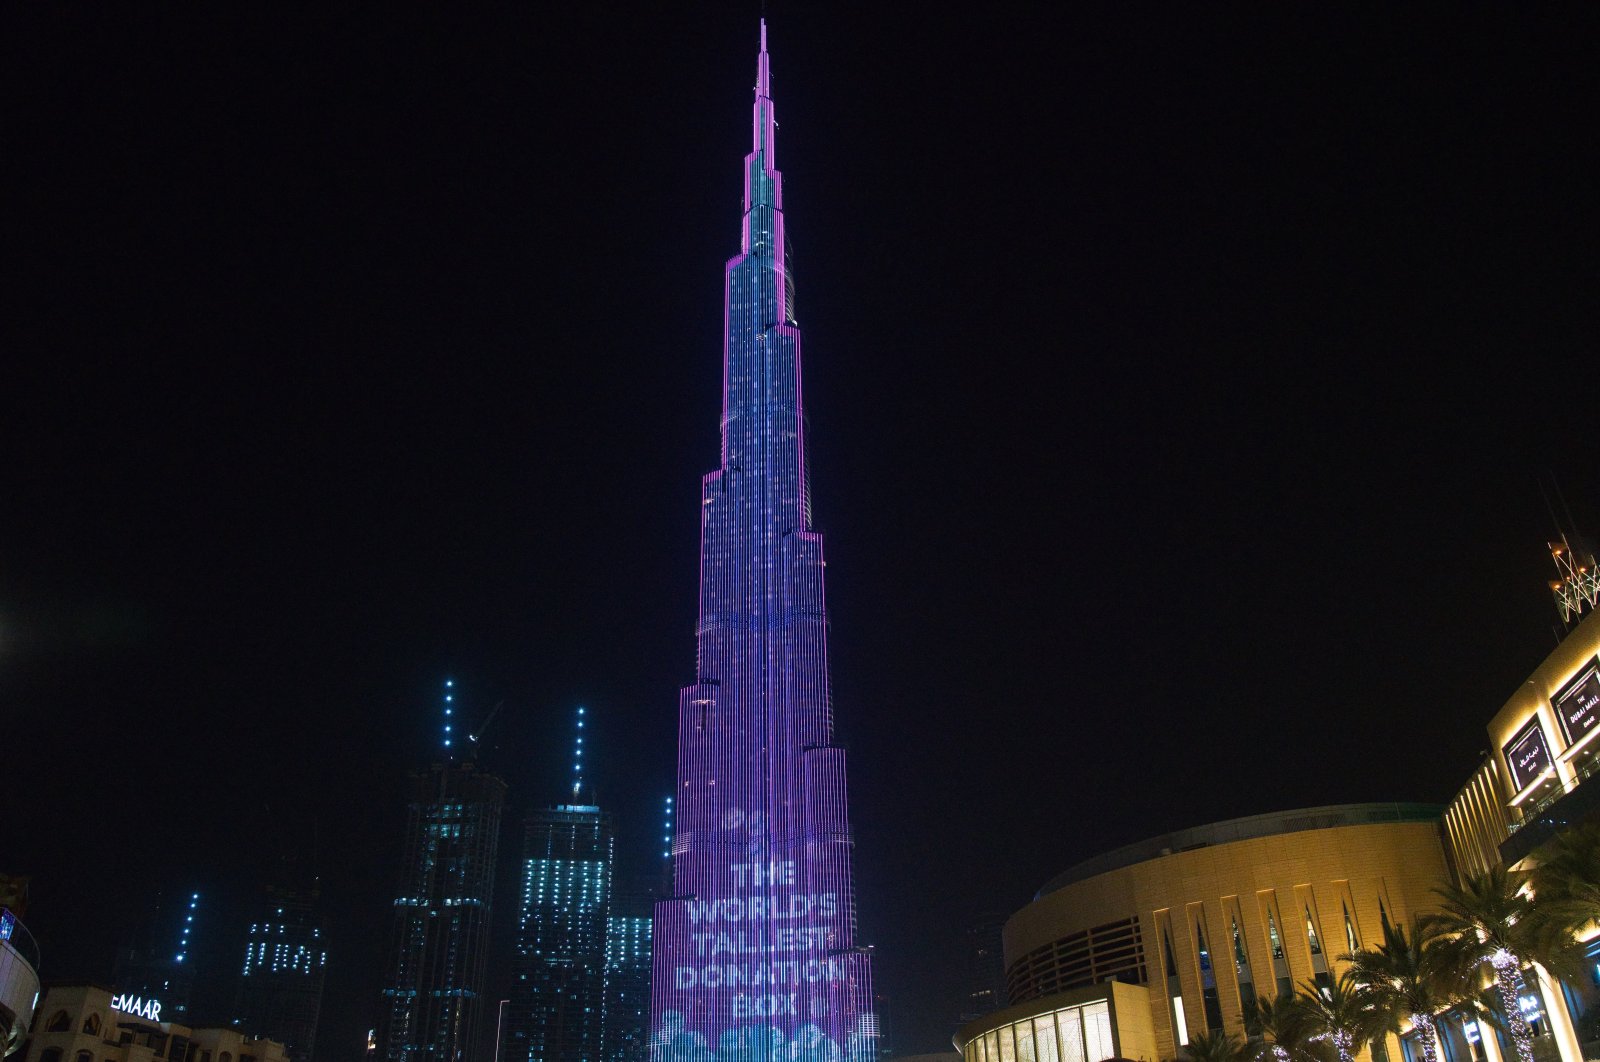 The Burj Khalifa, the world's tallest building, displays a message as part of the "World's Tallest Donation Box" campaign in Dubai, United Arab Emirates, Monday, May 11, 2020. (AP File Photo)